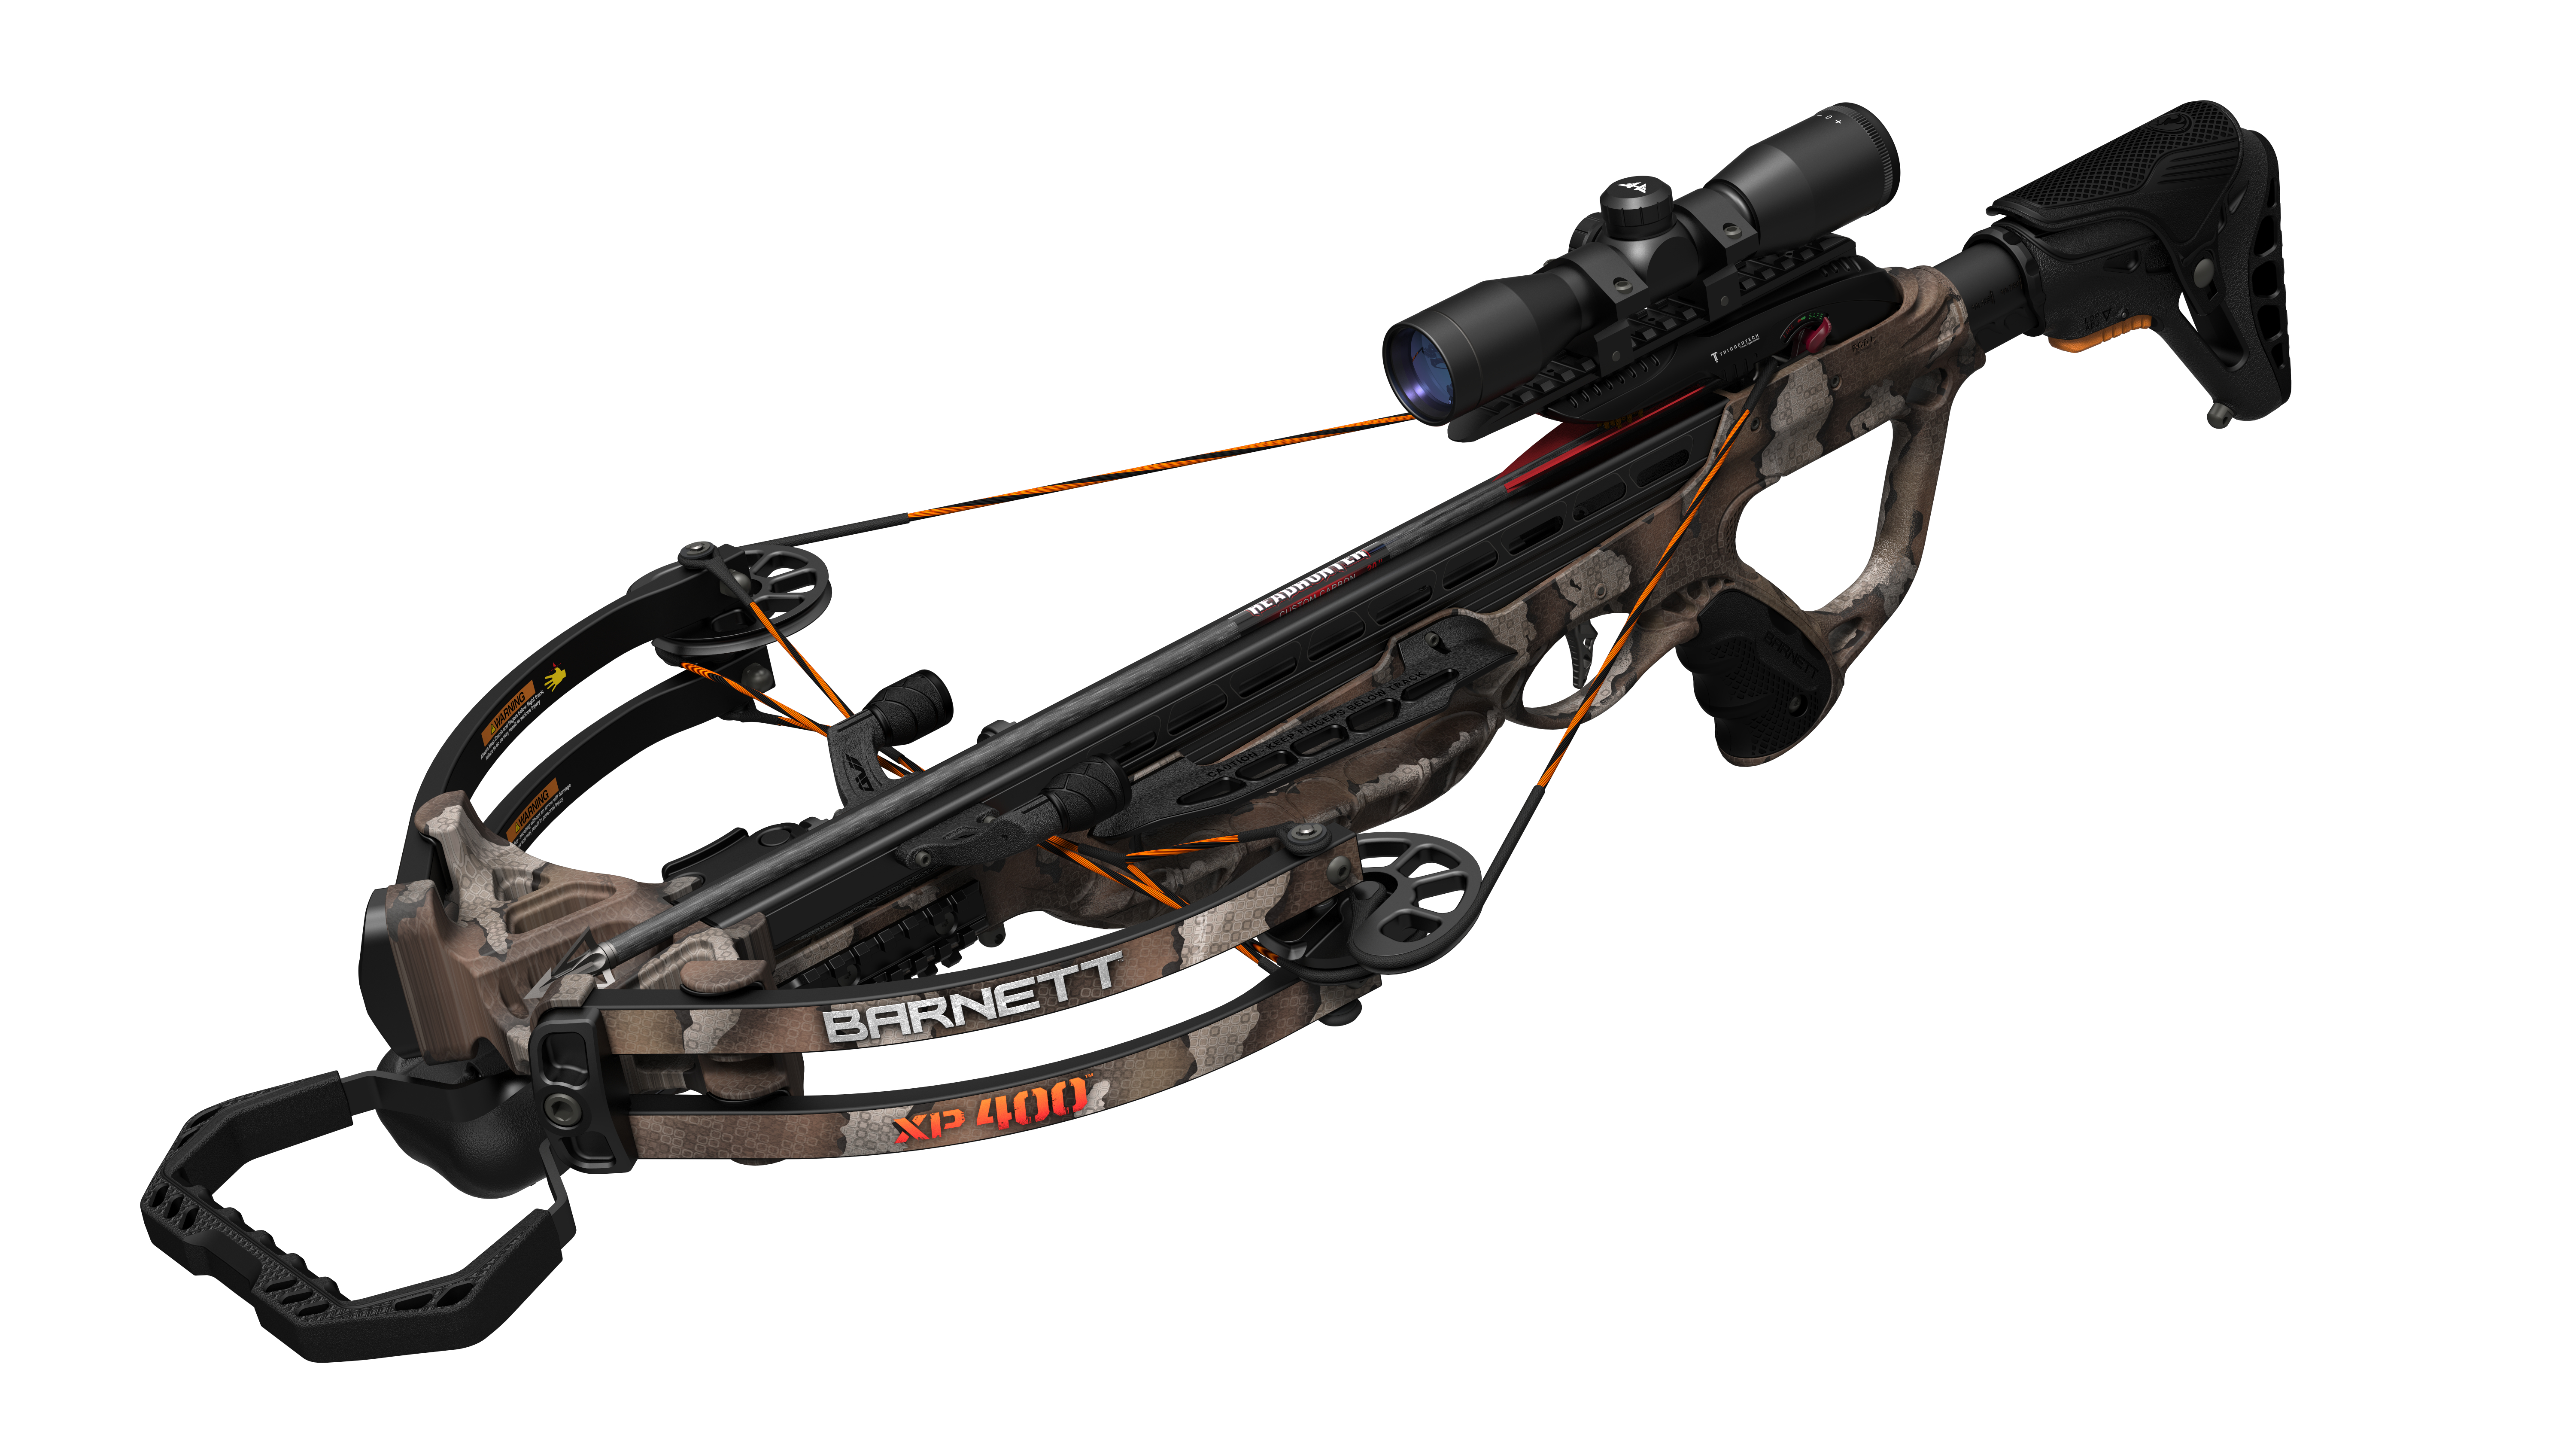 BAR XP400 XBOW Barnett Expedition 400 Crossbow, Crank Cocking Device Included, 400 FPS - image 1 of 9